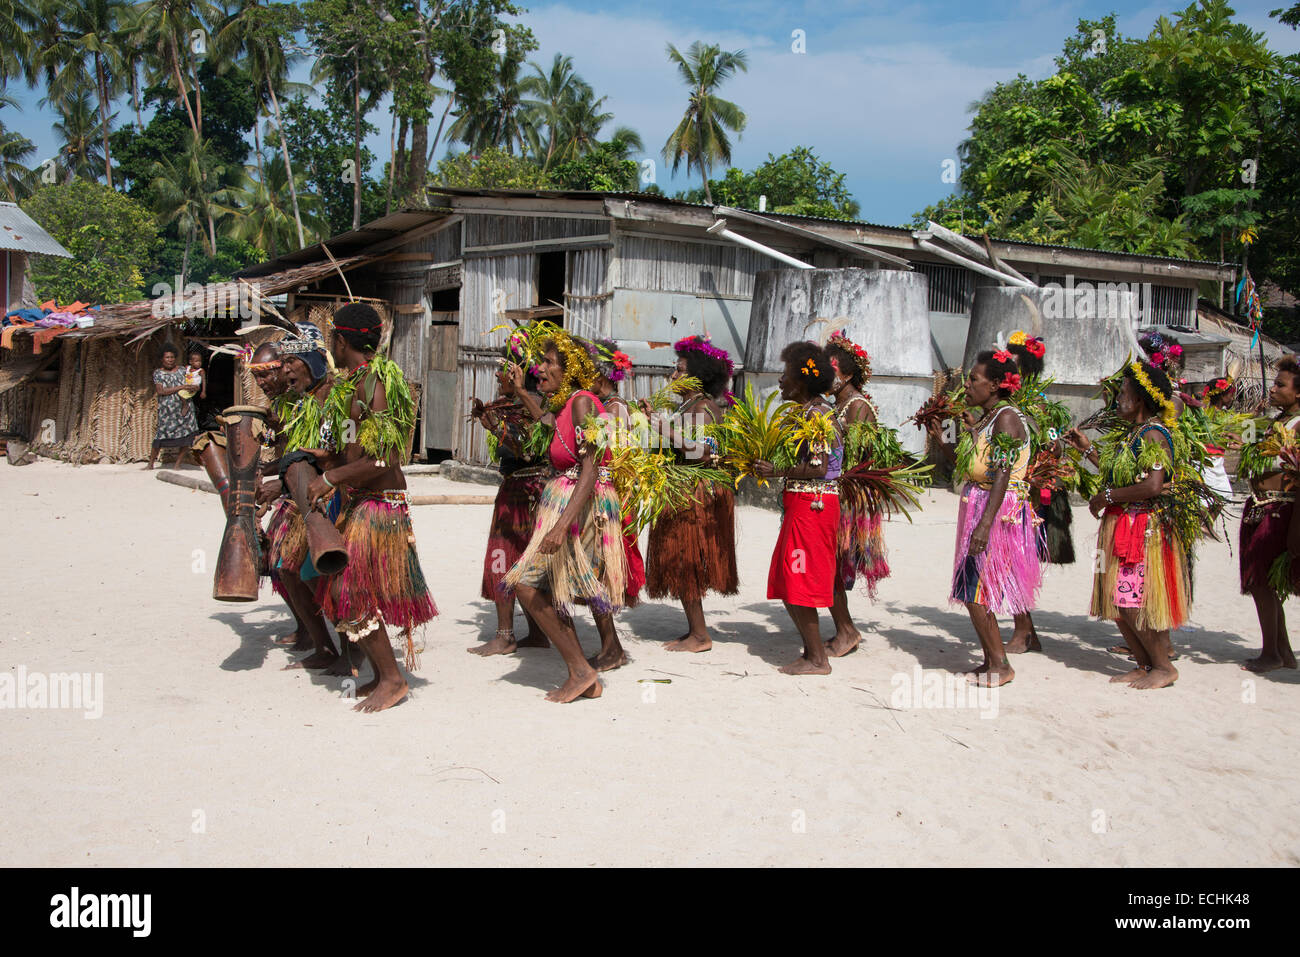 Melanesia, New Guinea, Papua New Guinea. Small island of Ali off the coast of mainland PNG. Local villagers dancing in costume. Stock Photo